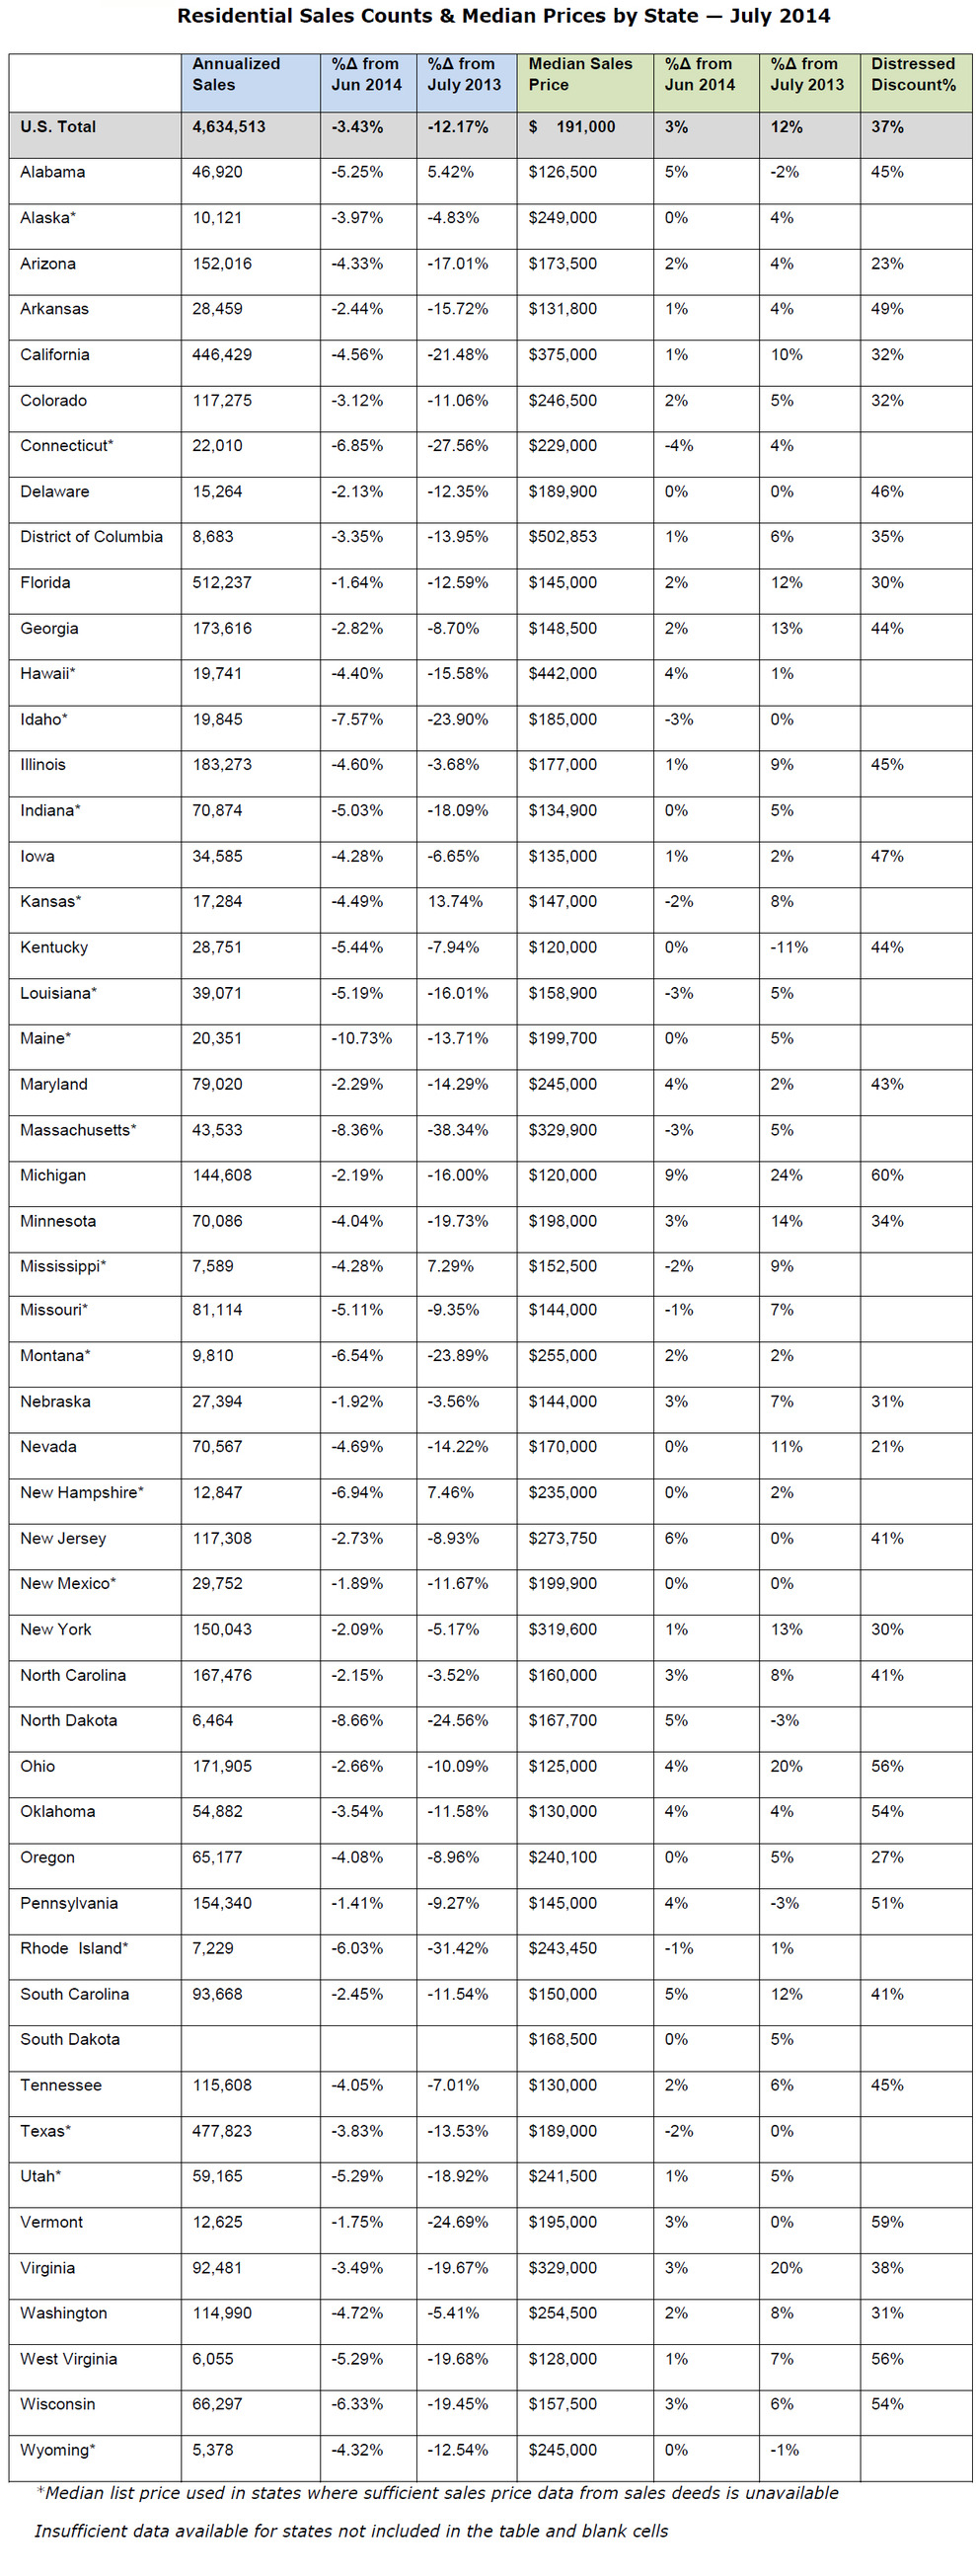 Residential-Sales-Counts-and-Median-Prices-by-State-July-2014.jpg